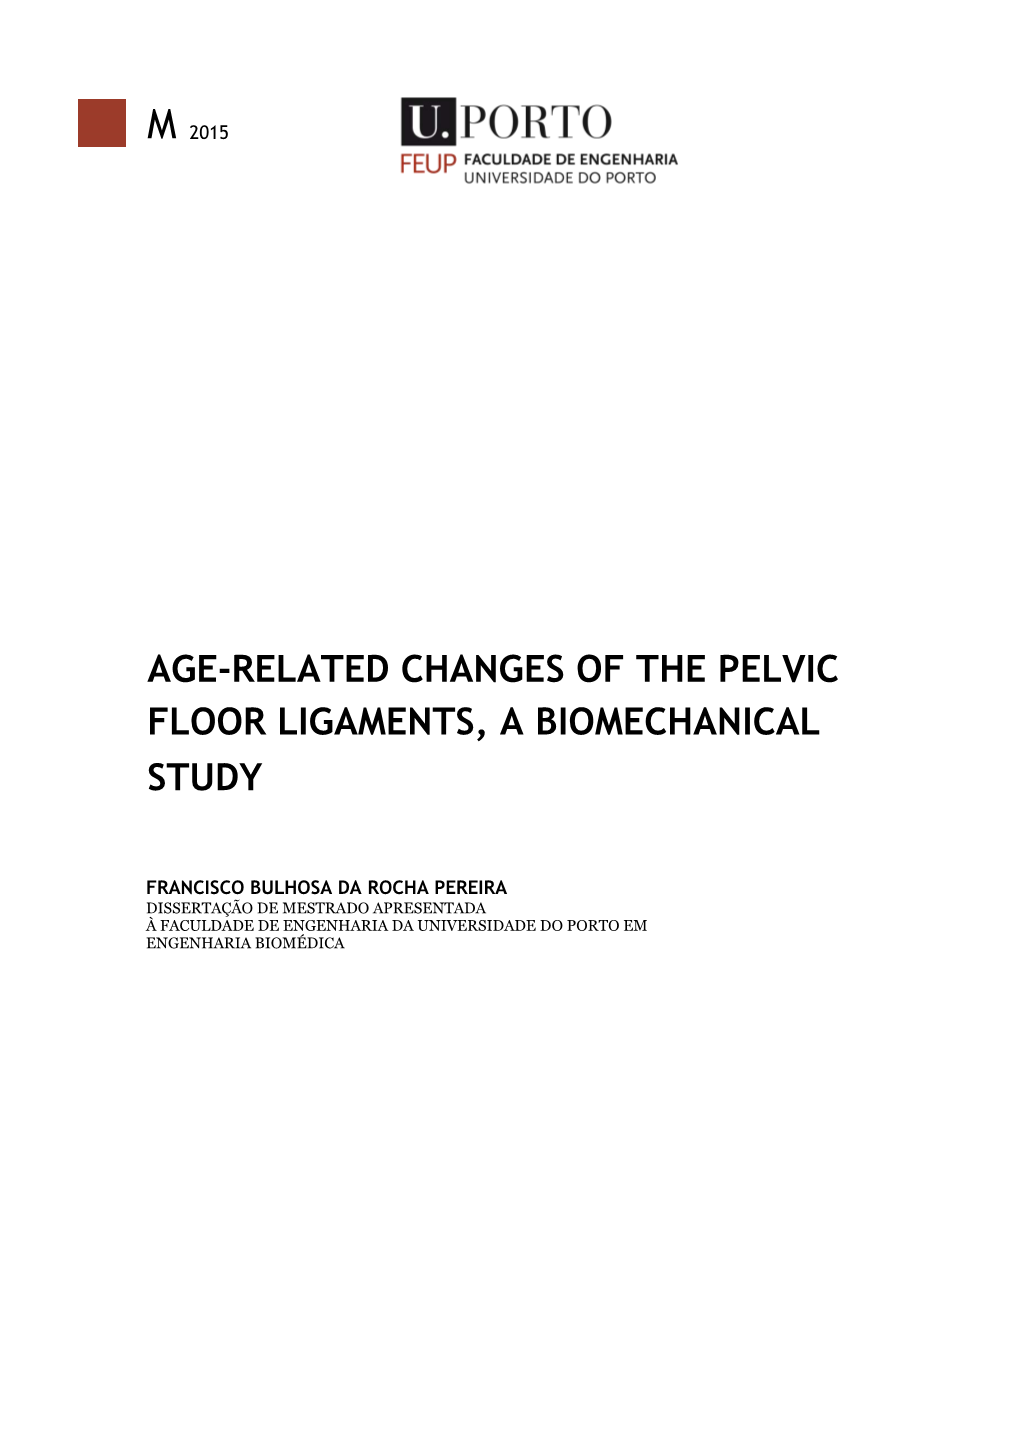 Age-Related Changes of the Pelvic Floor Ligaments, a Biomechanical Study